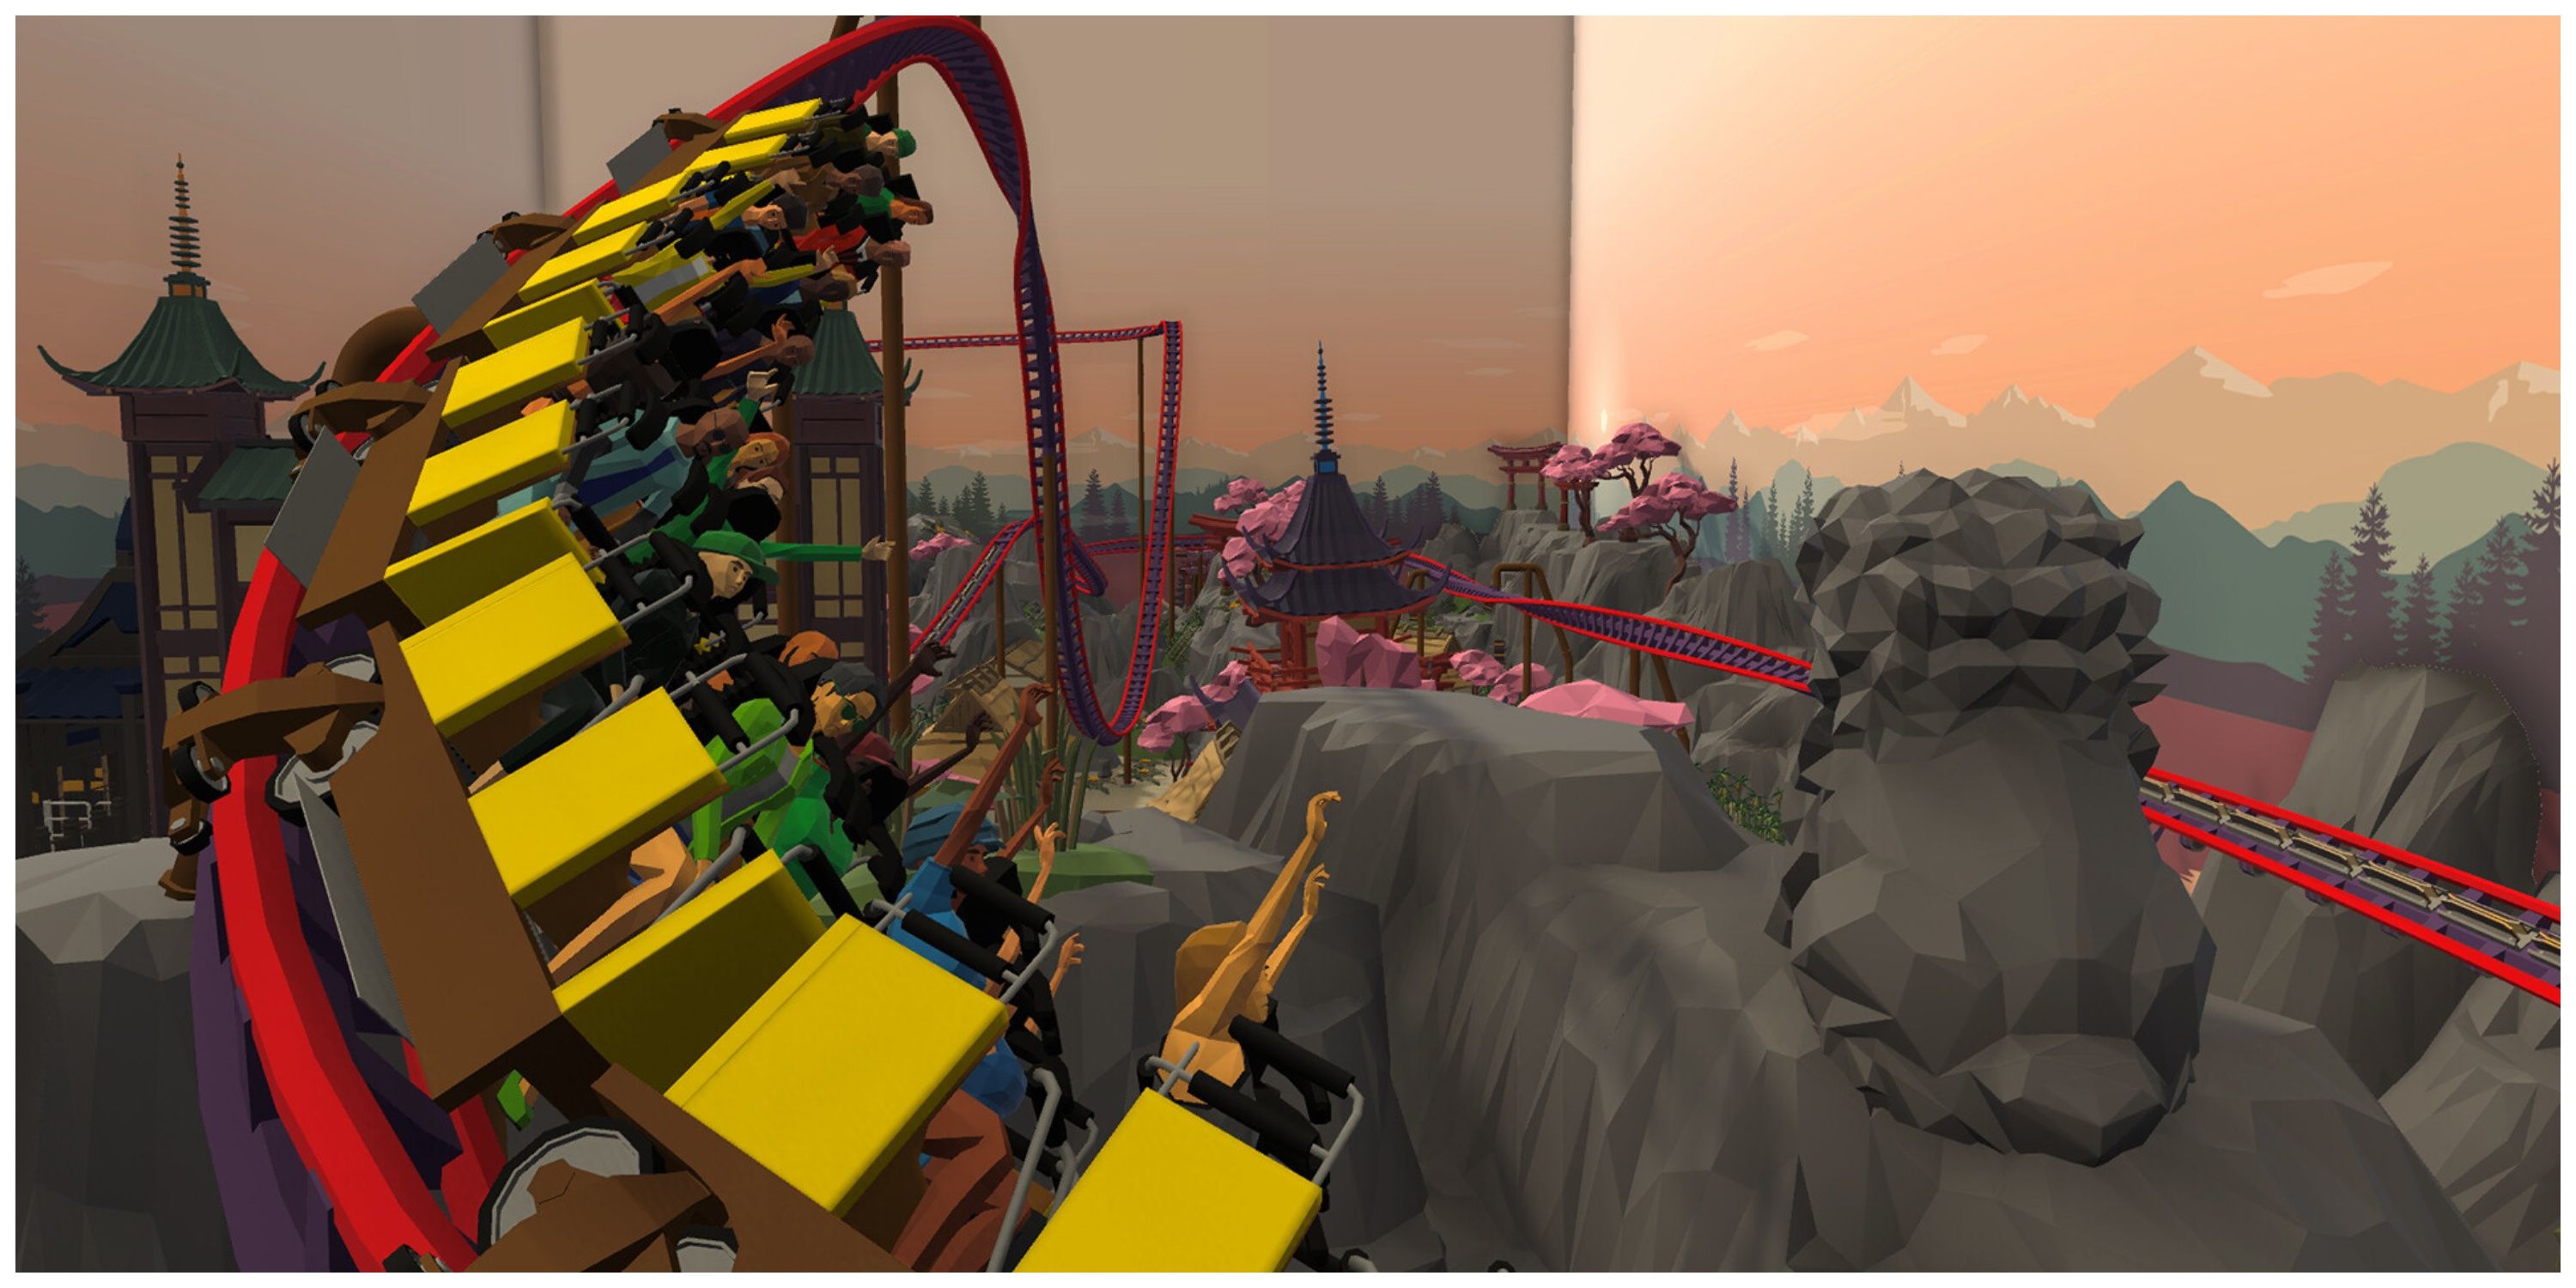 Indoorlands - Steam Store Page Screenshot (Customers Riding A Roller Coaster)